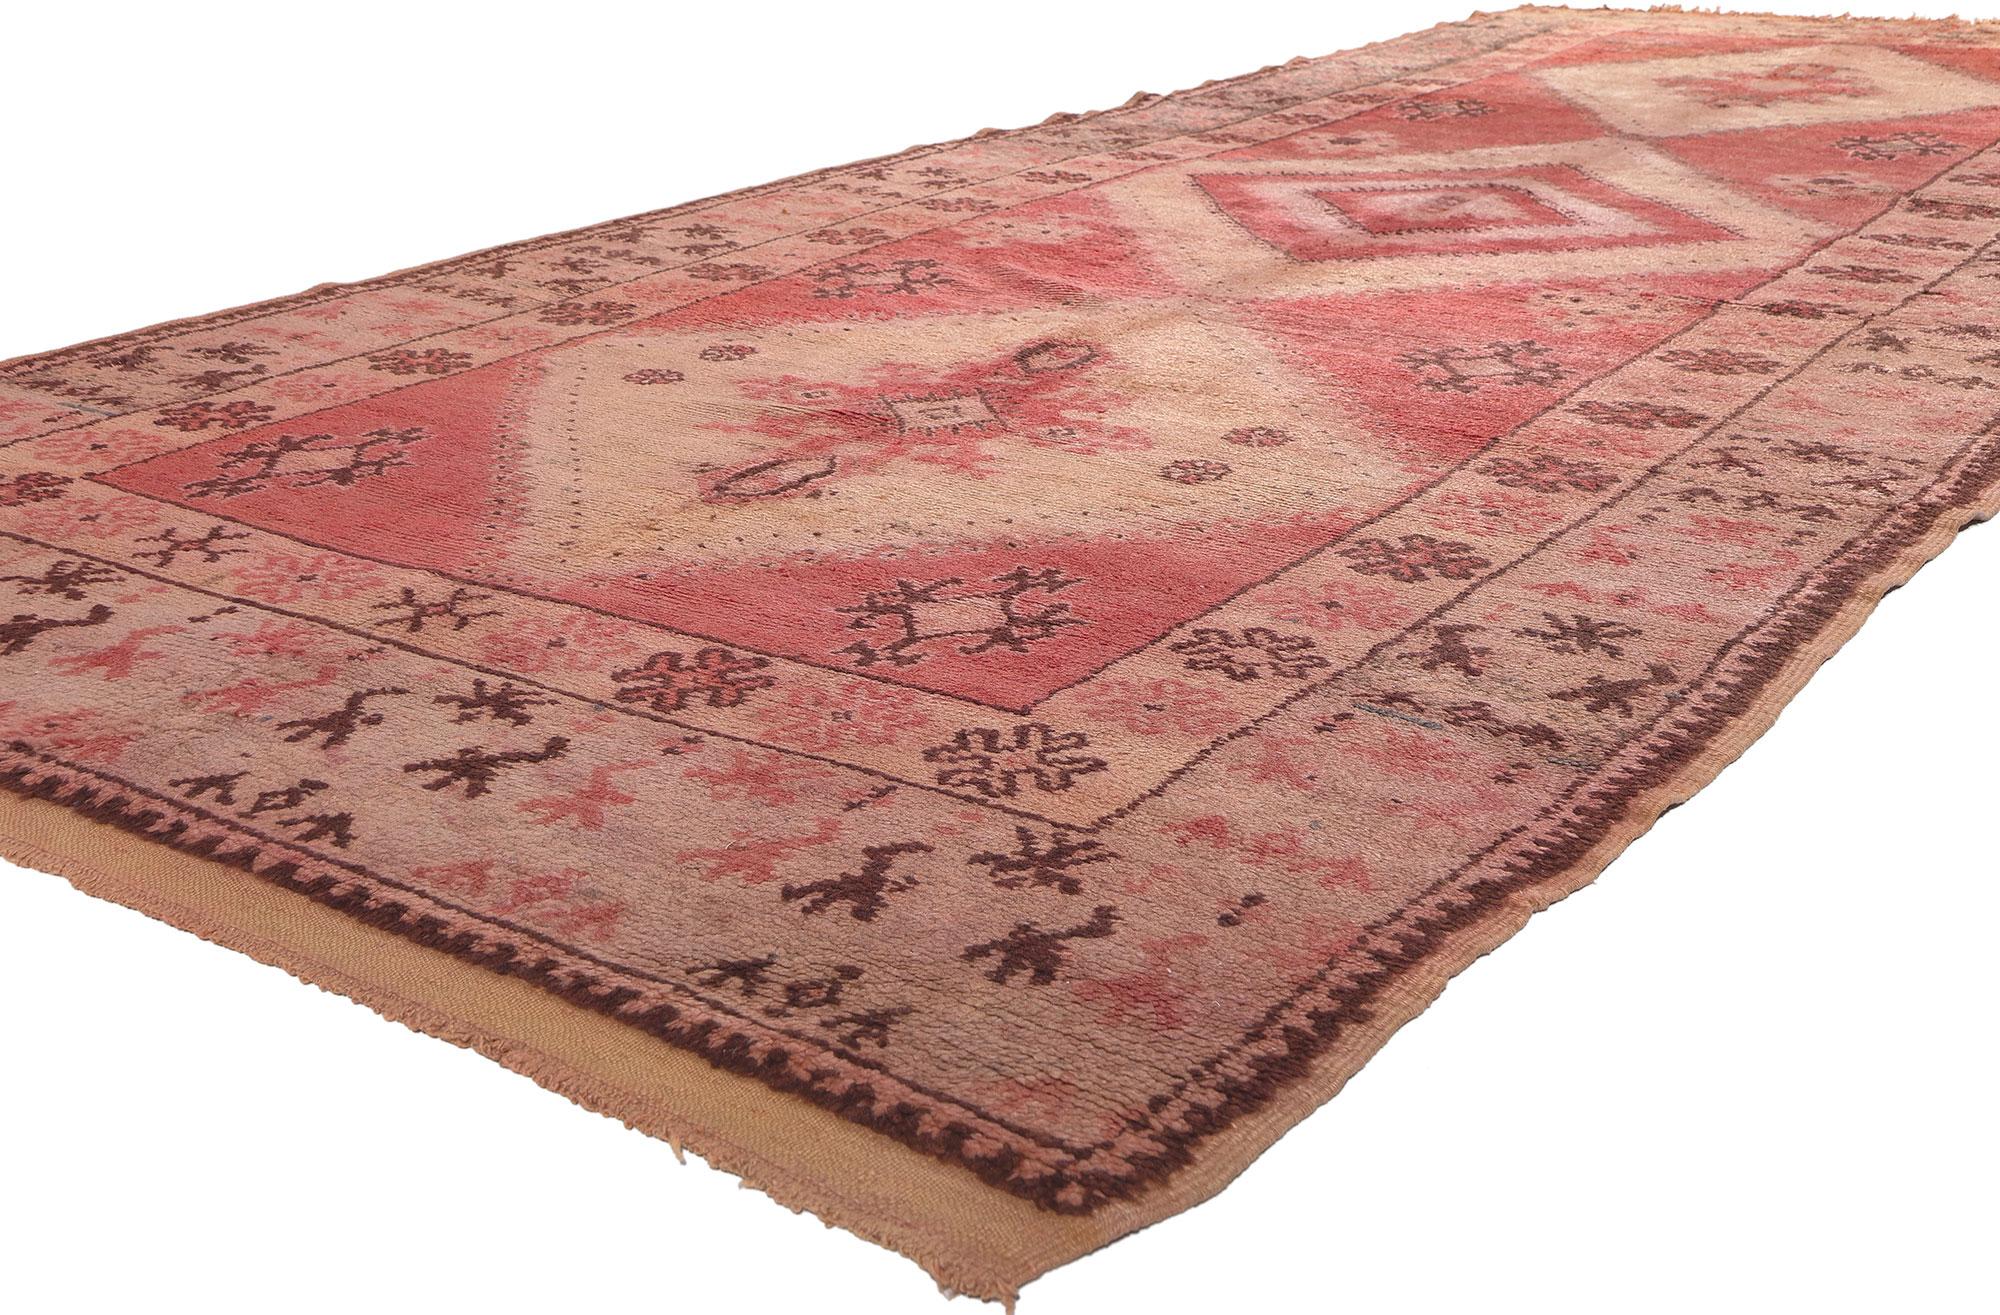 20194 Vintage Talsint Moroccan Rug, 05'07 x 14'02. Boho Jungalow meets nomadic charm in this hand-knotted wool vintage Talsint Moroccan rug. The abrashed red field features three stepped lozenge medallions. The center lozenge is adorned with